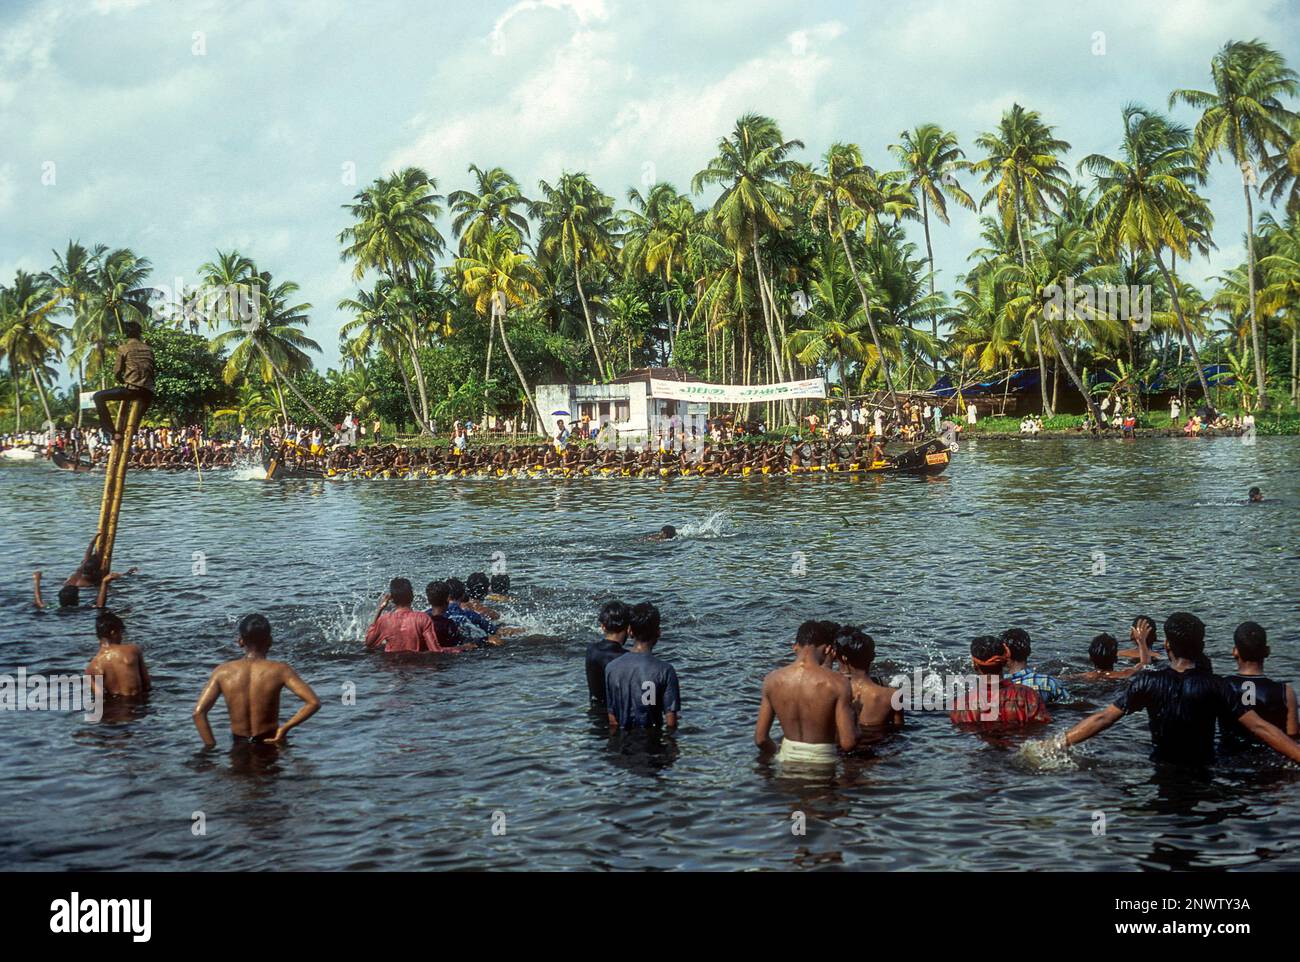 Enthusiastic spectators in Nehru Trophy Boat Race, Alappuzha Alleppey, Kerala, South India, India, Asia Stock Photo